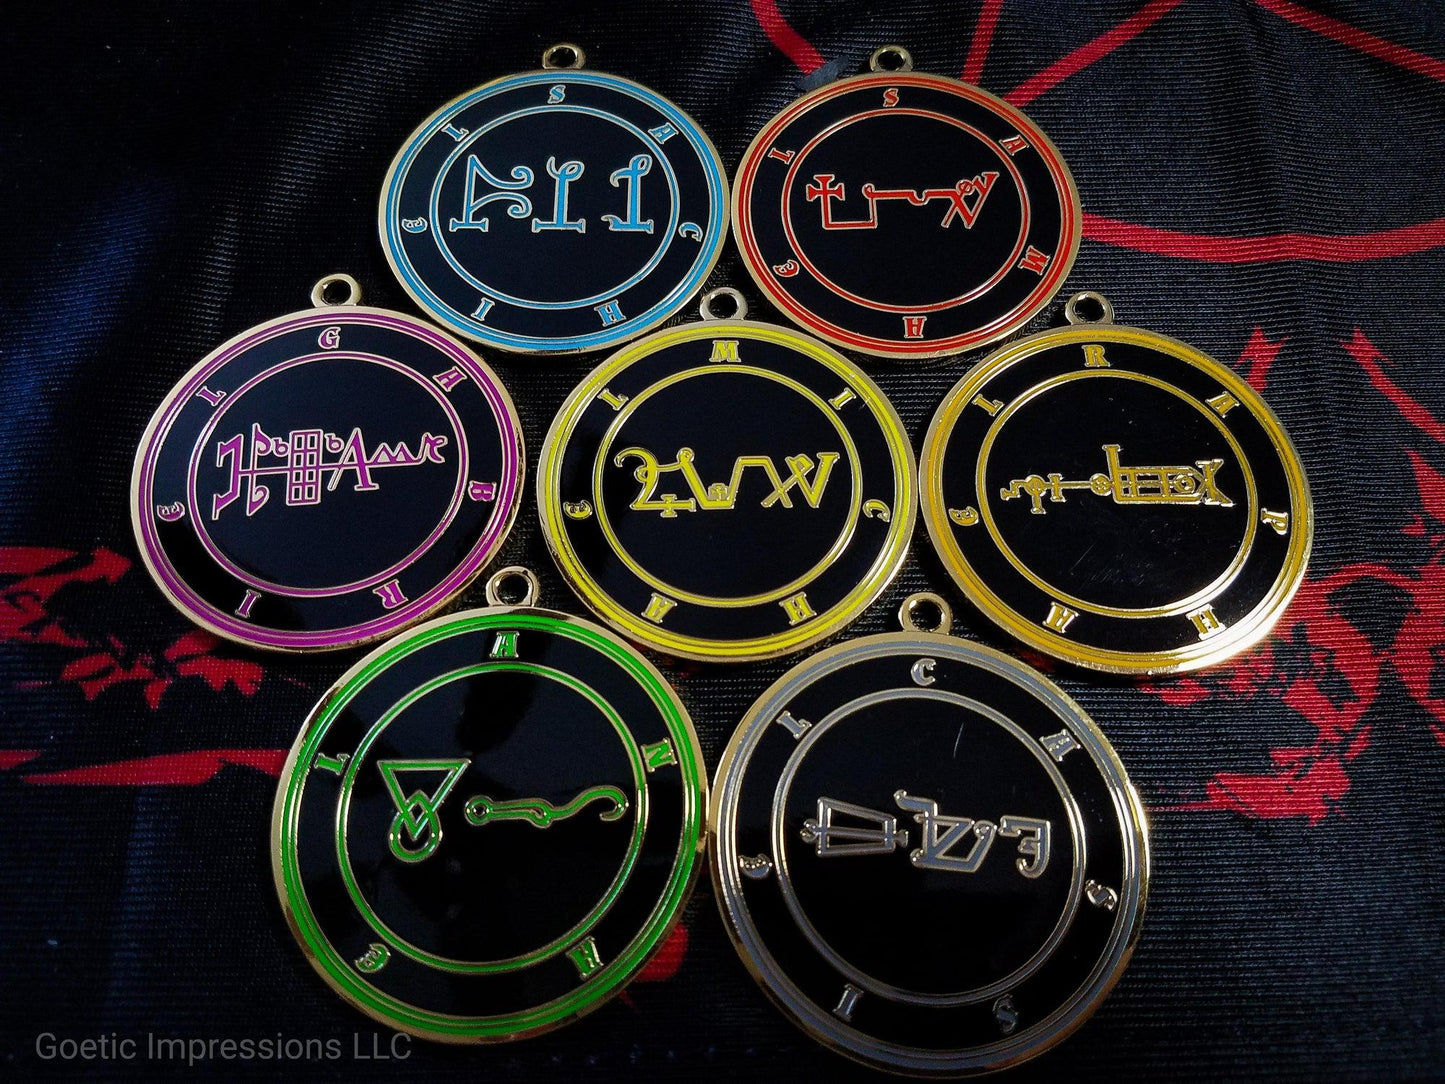 All 7 planetary archangel medallions based on the Heptarmeron and Cornelius Agrippa